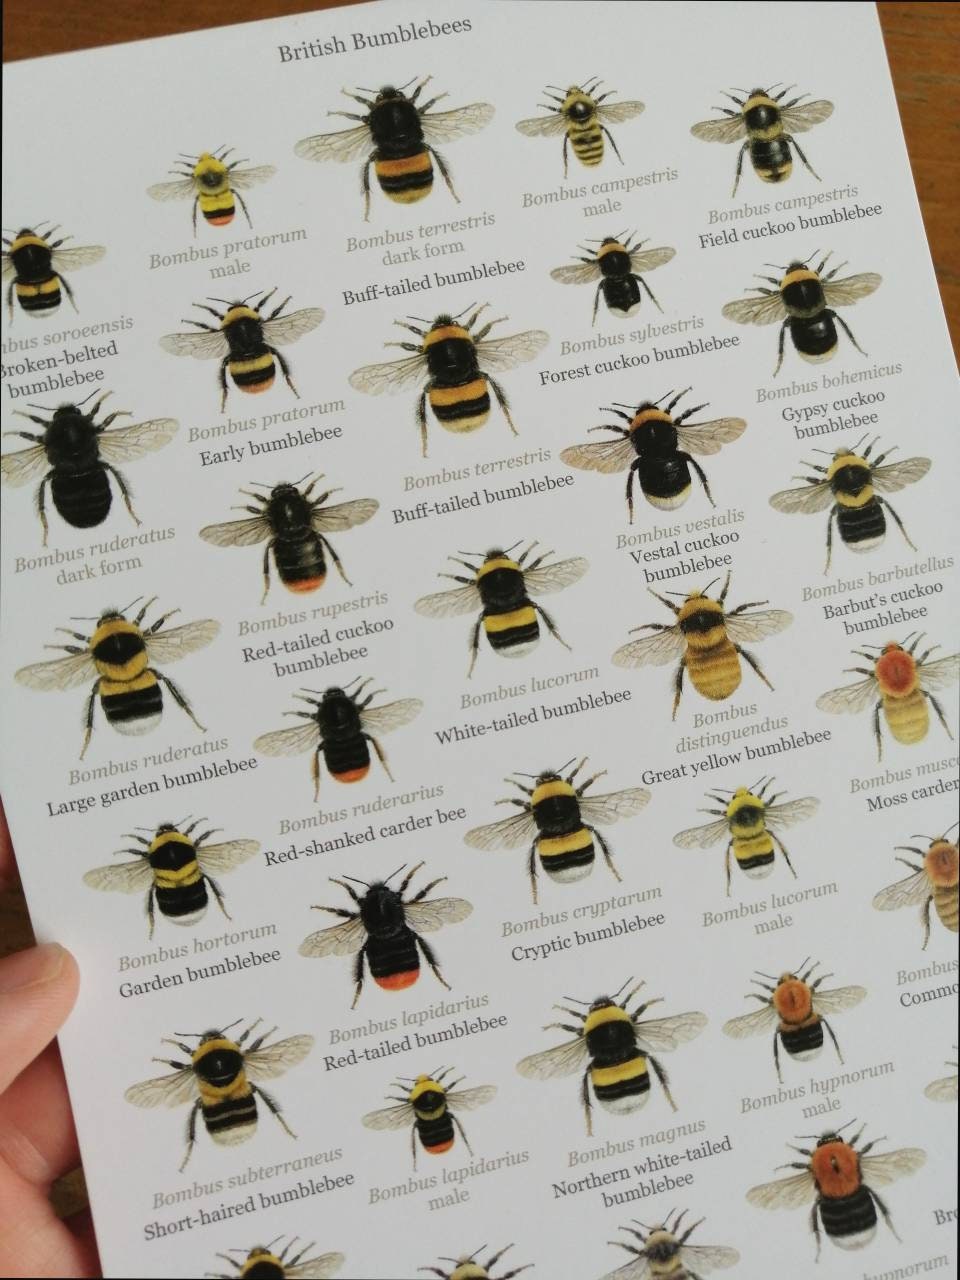 A4 size limited edition art print, Lifesize British Bumblebees, with A5 size Key to species.